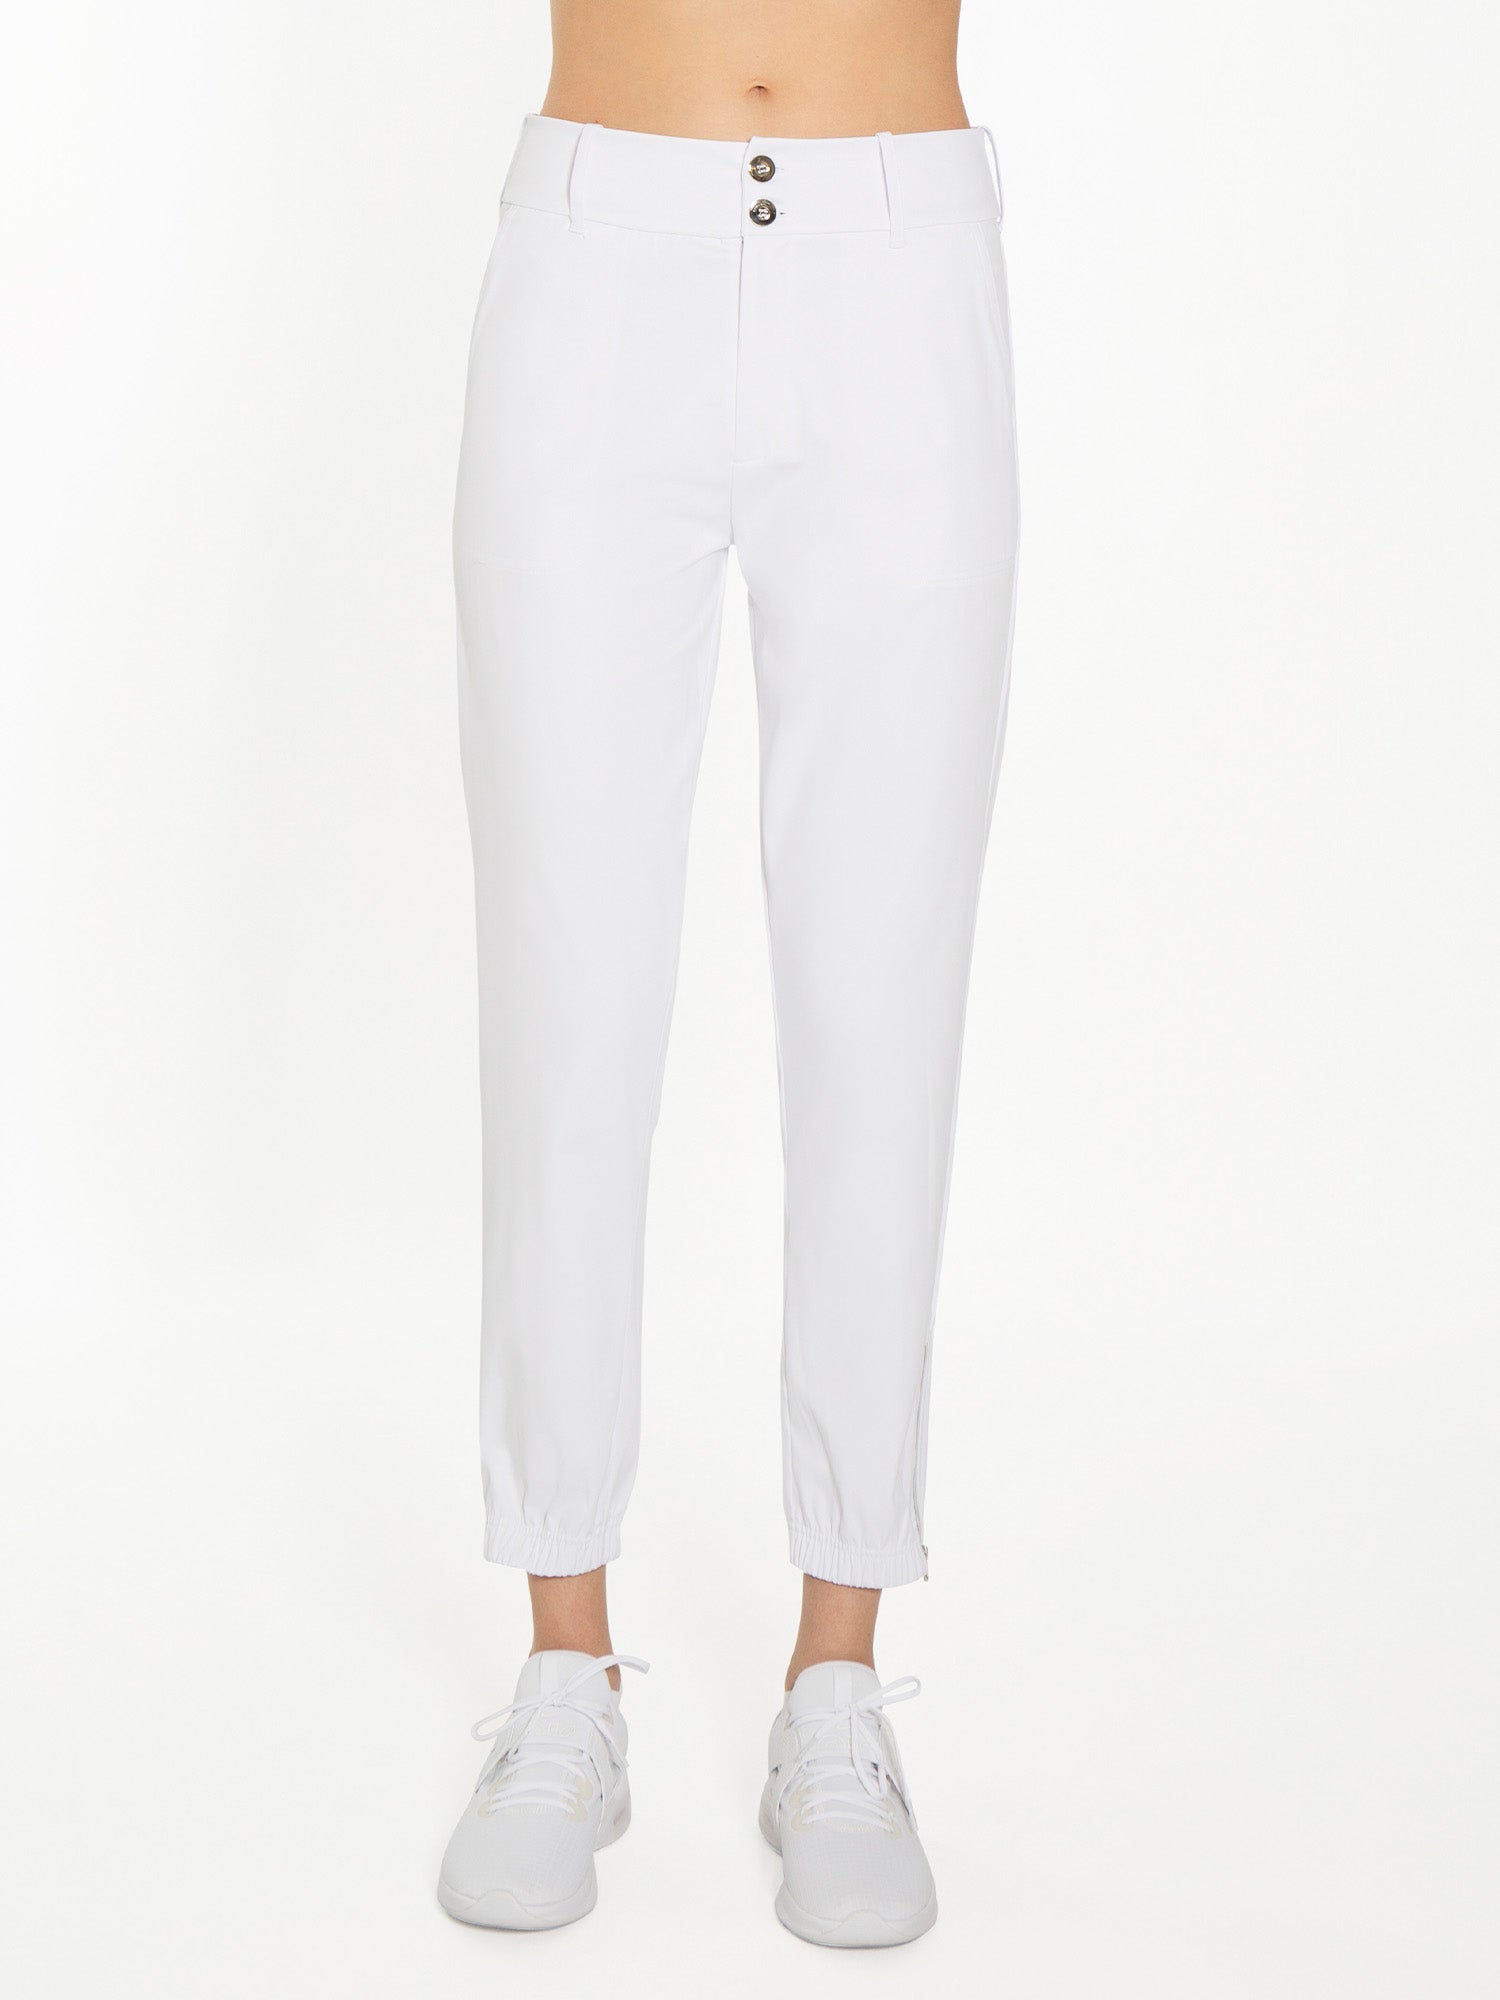 Easy Fit Active Pants - White